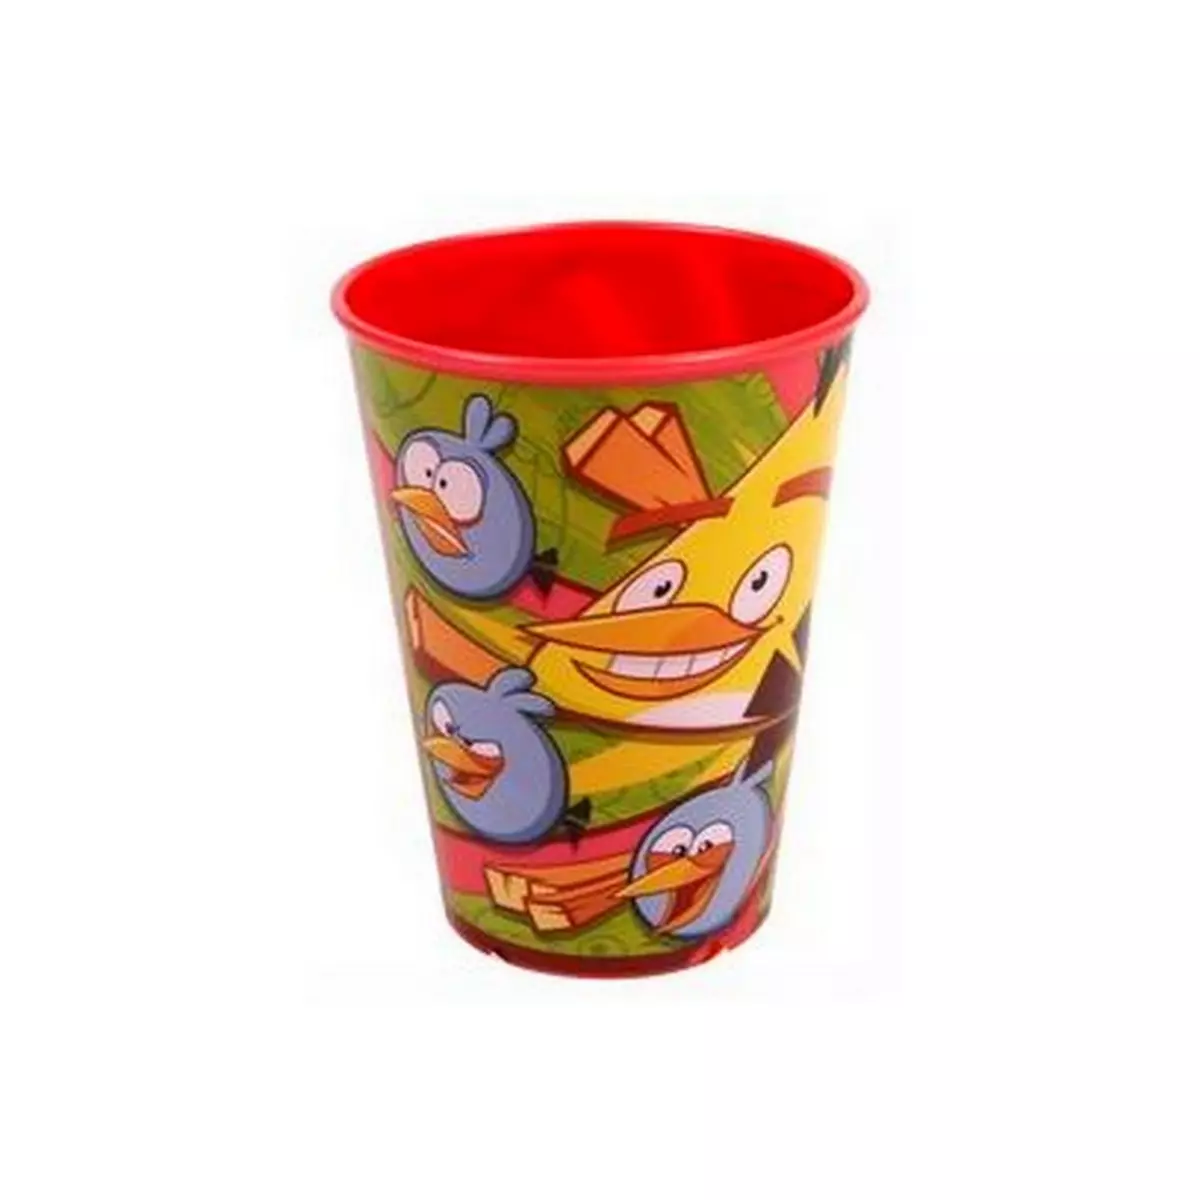 ANGRY BIRD Gobelet Angry Birds plastique enfant